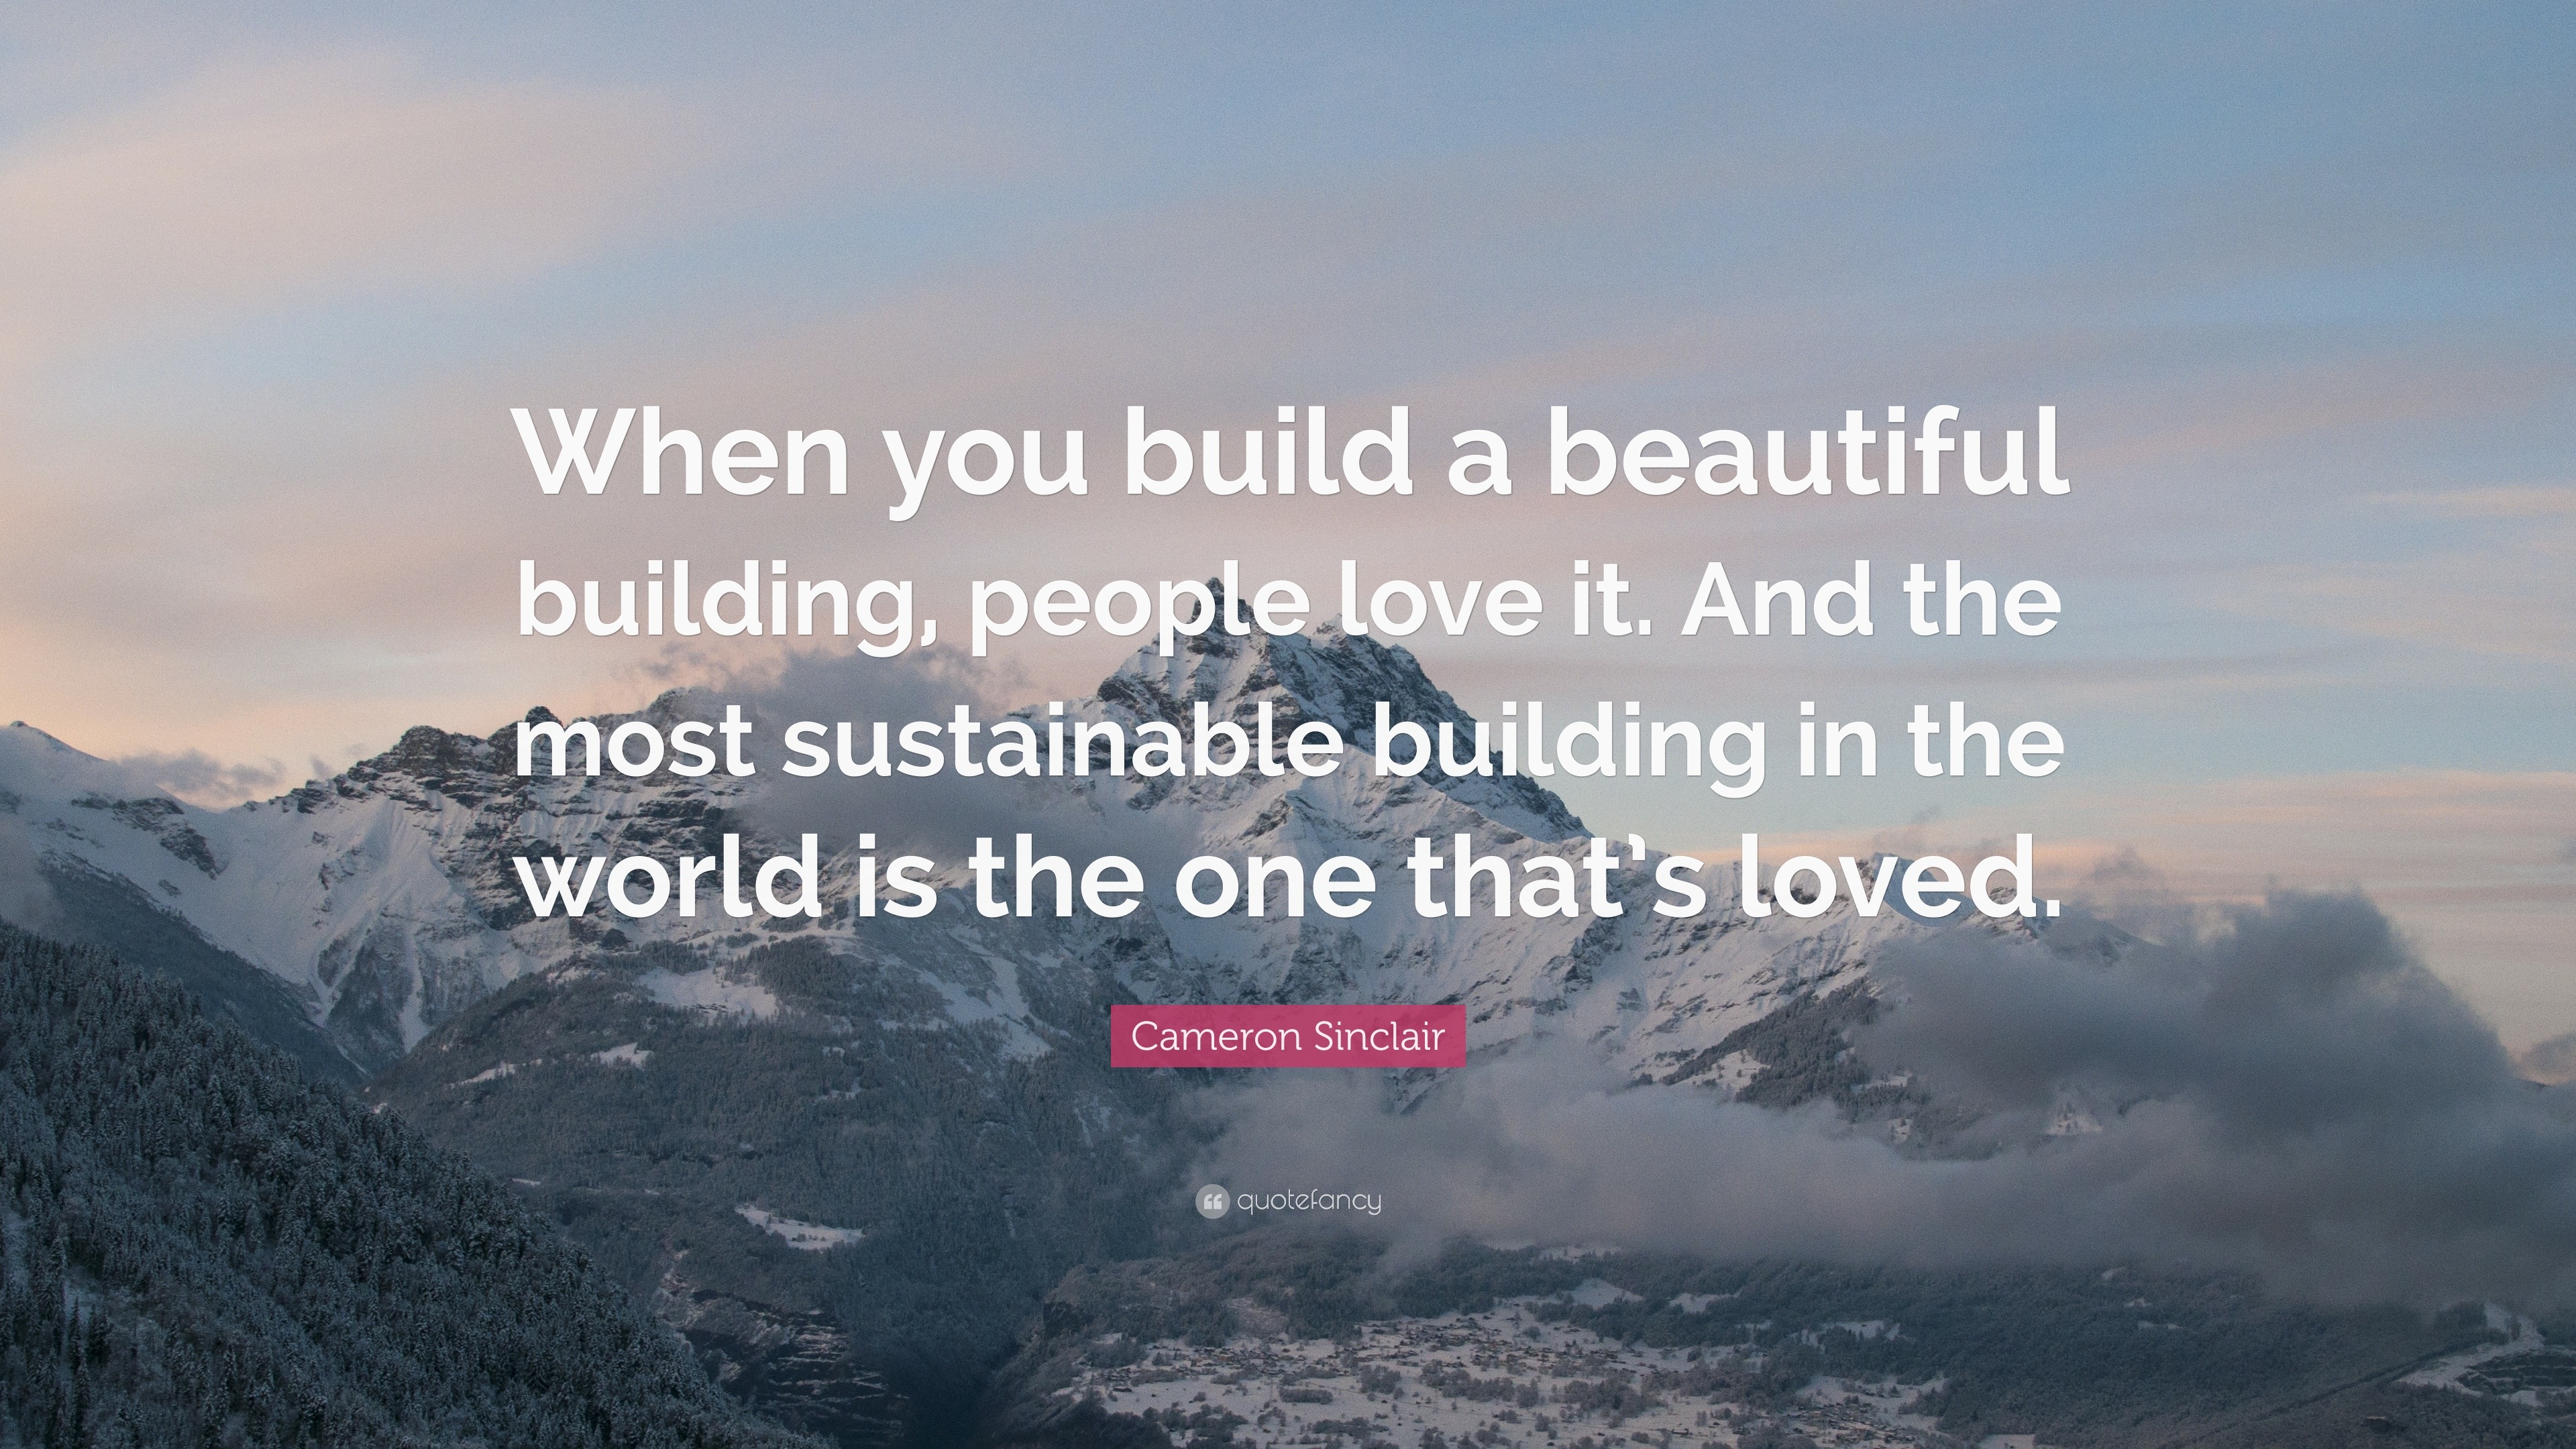 Cameron Sinclair Quote When You Build A Beautiful Building People Love It And The Most Sustainable Building In The World Is The One That S Lo